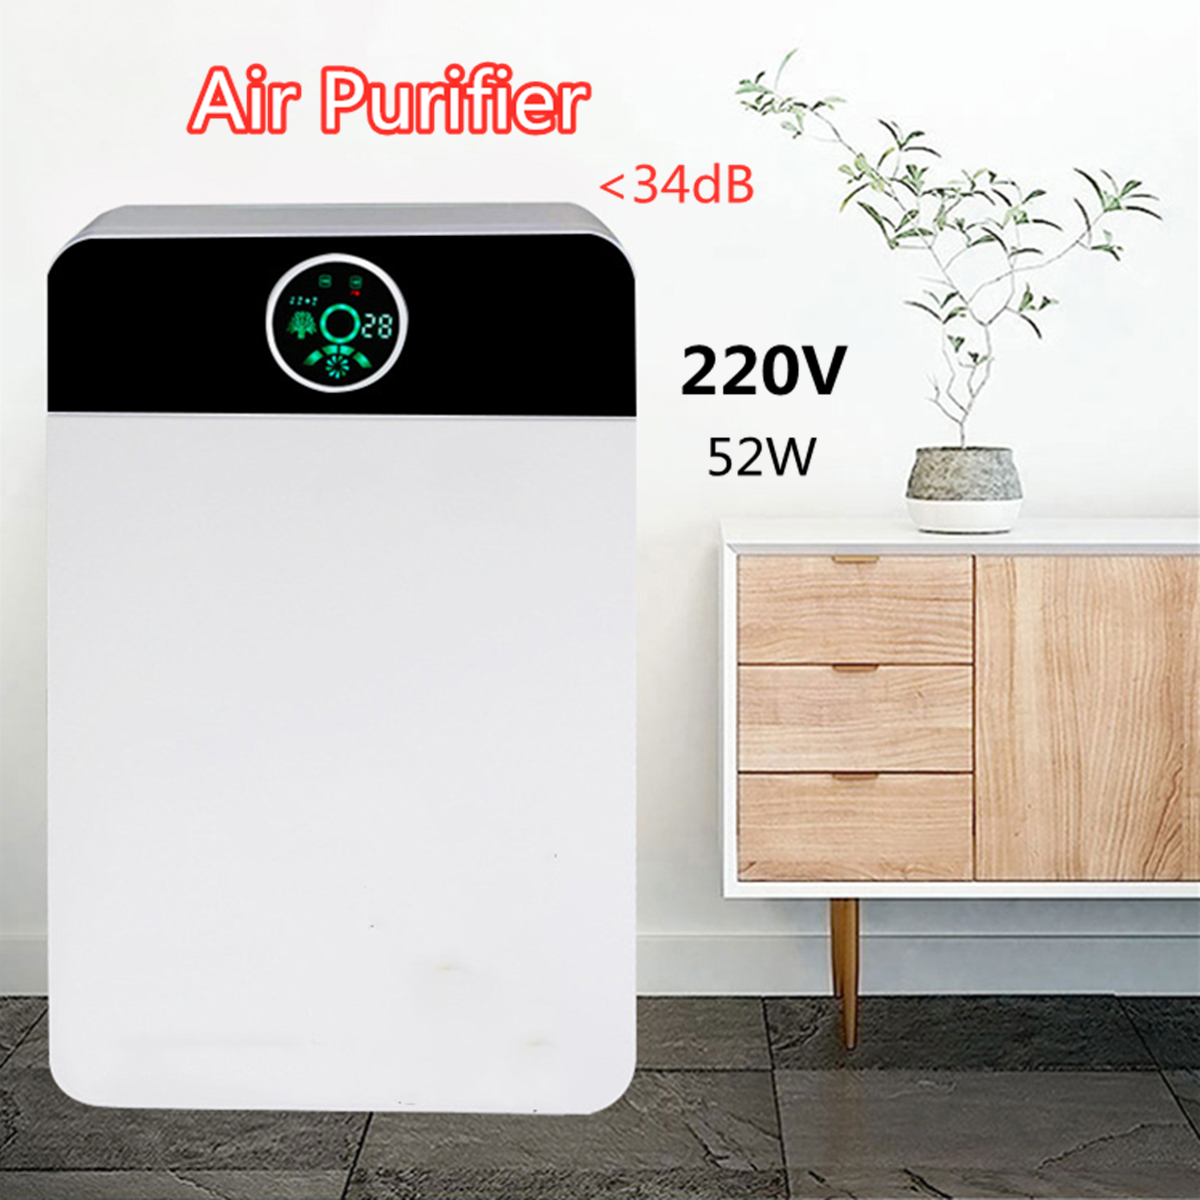 220V-Air-Purifier-Ozone-Anion-Allergens-Dust-Cleaner-Composite-Filter-W-Remote-Control-1432630-1